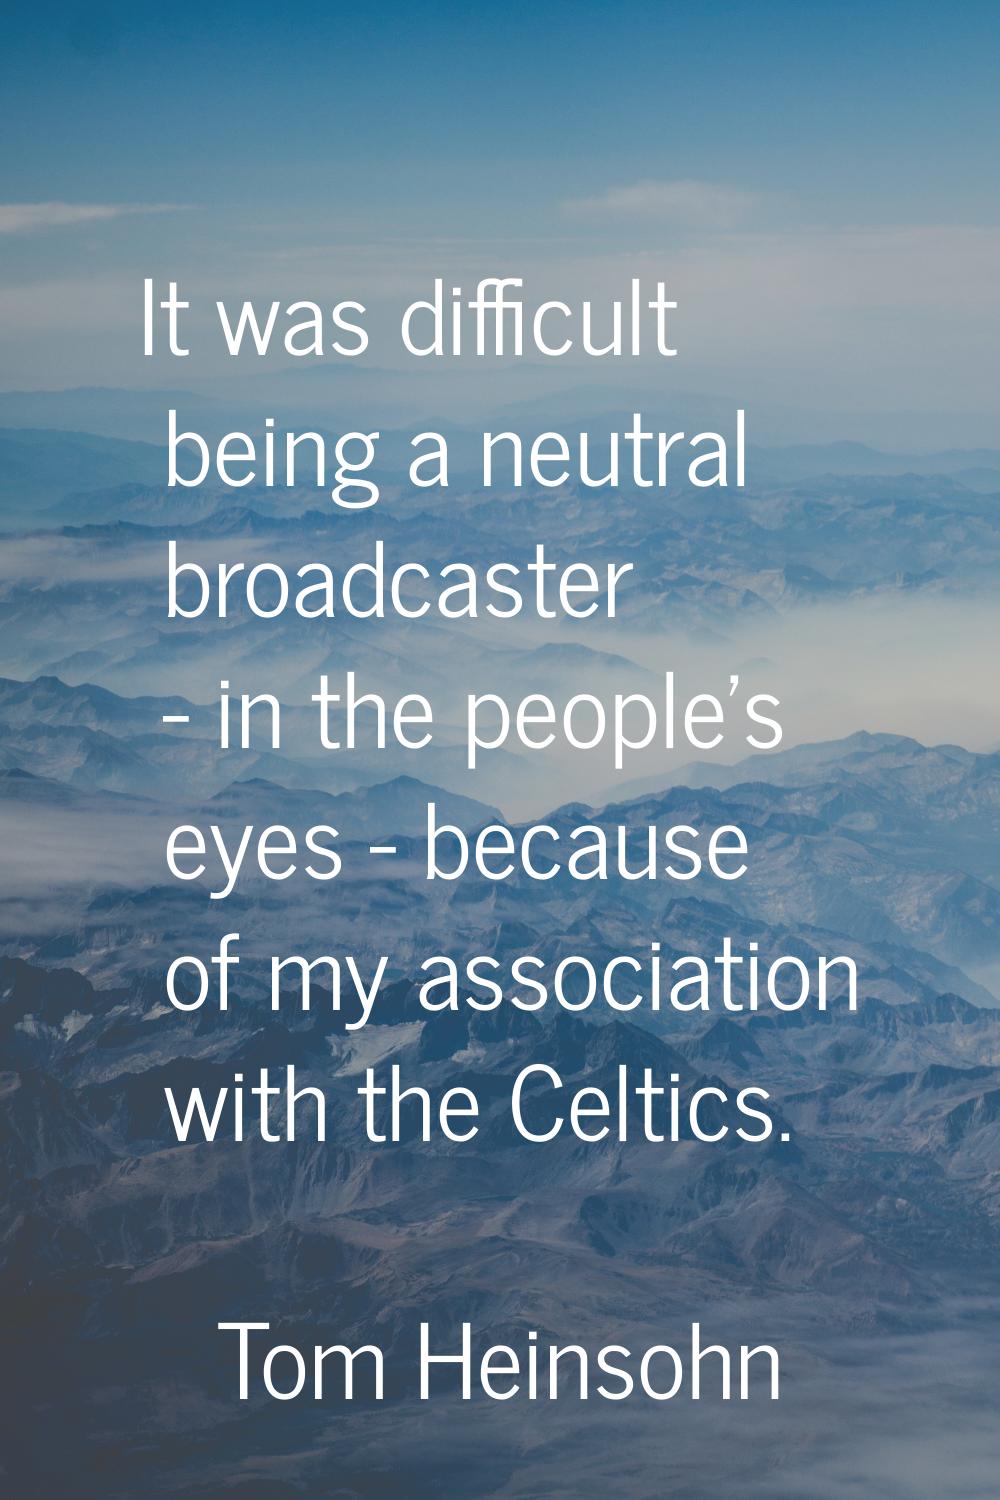 It was difficult being a neutral broadcaster - in the people's eyes - because of my association wit